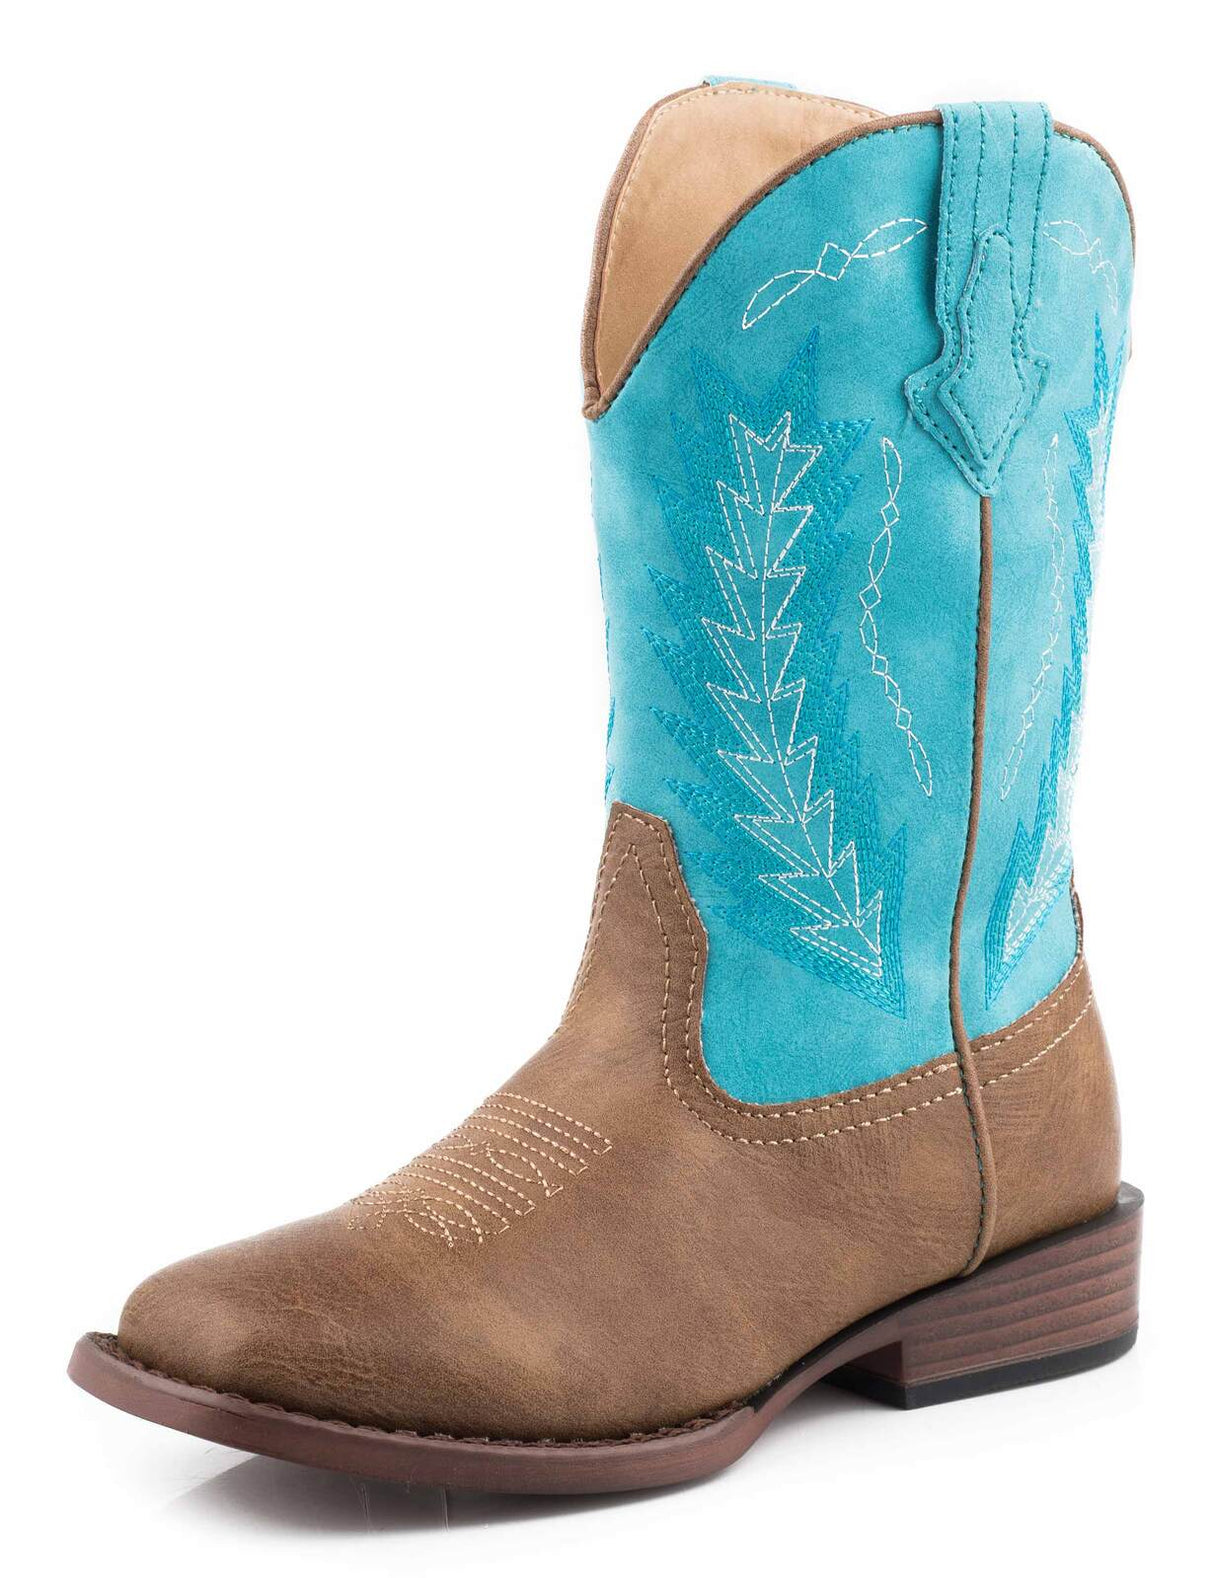 Roper Kids Billy Tan / Turquoise Boots